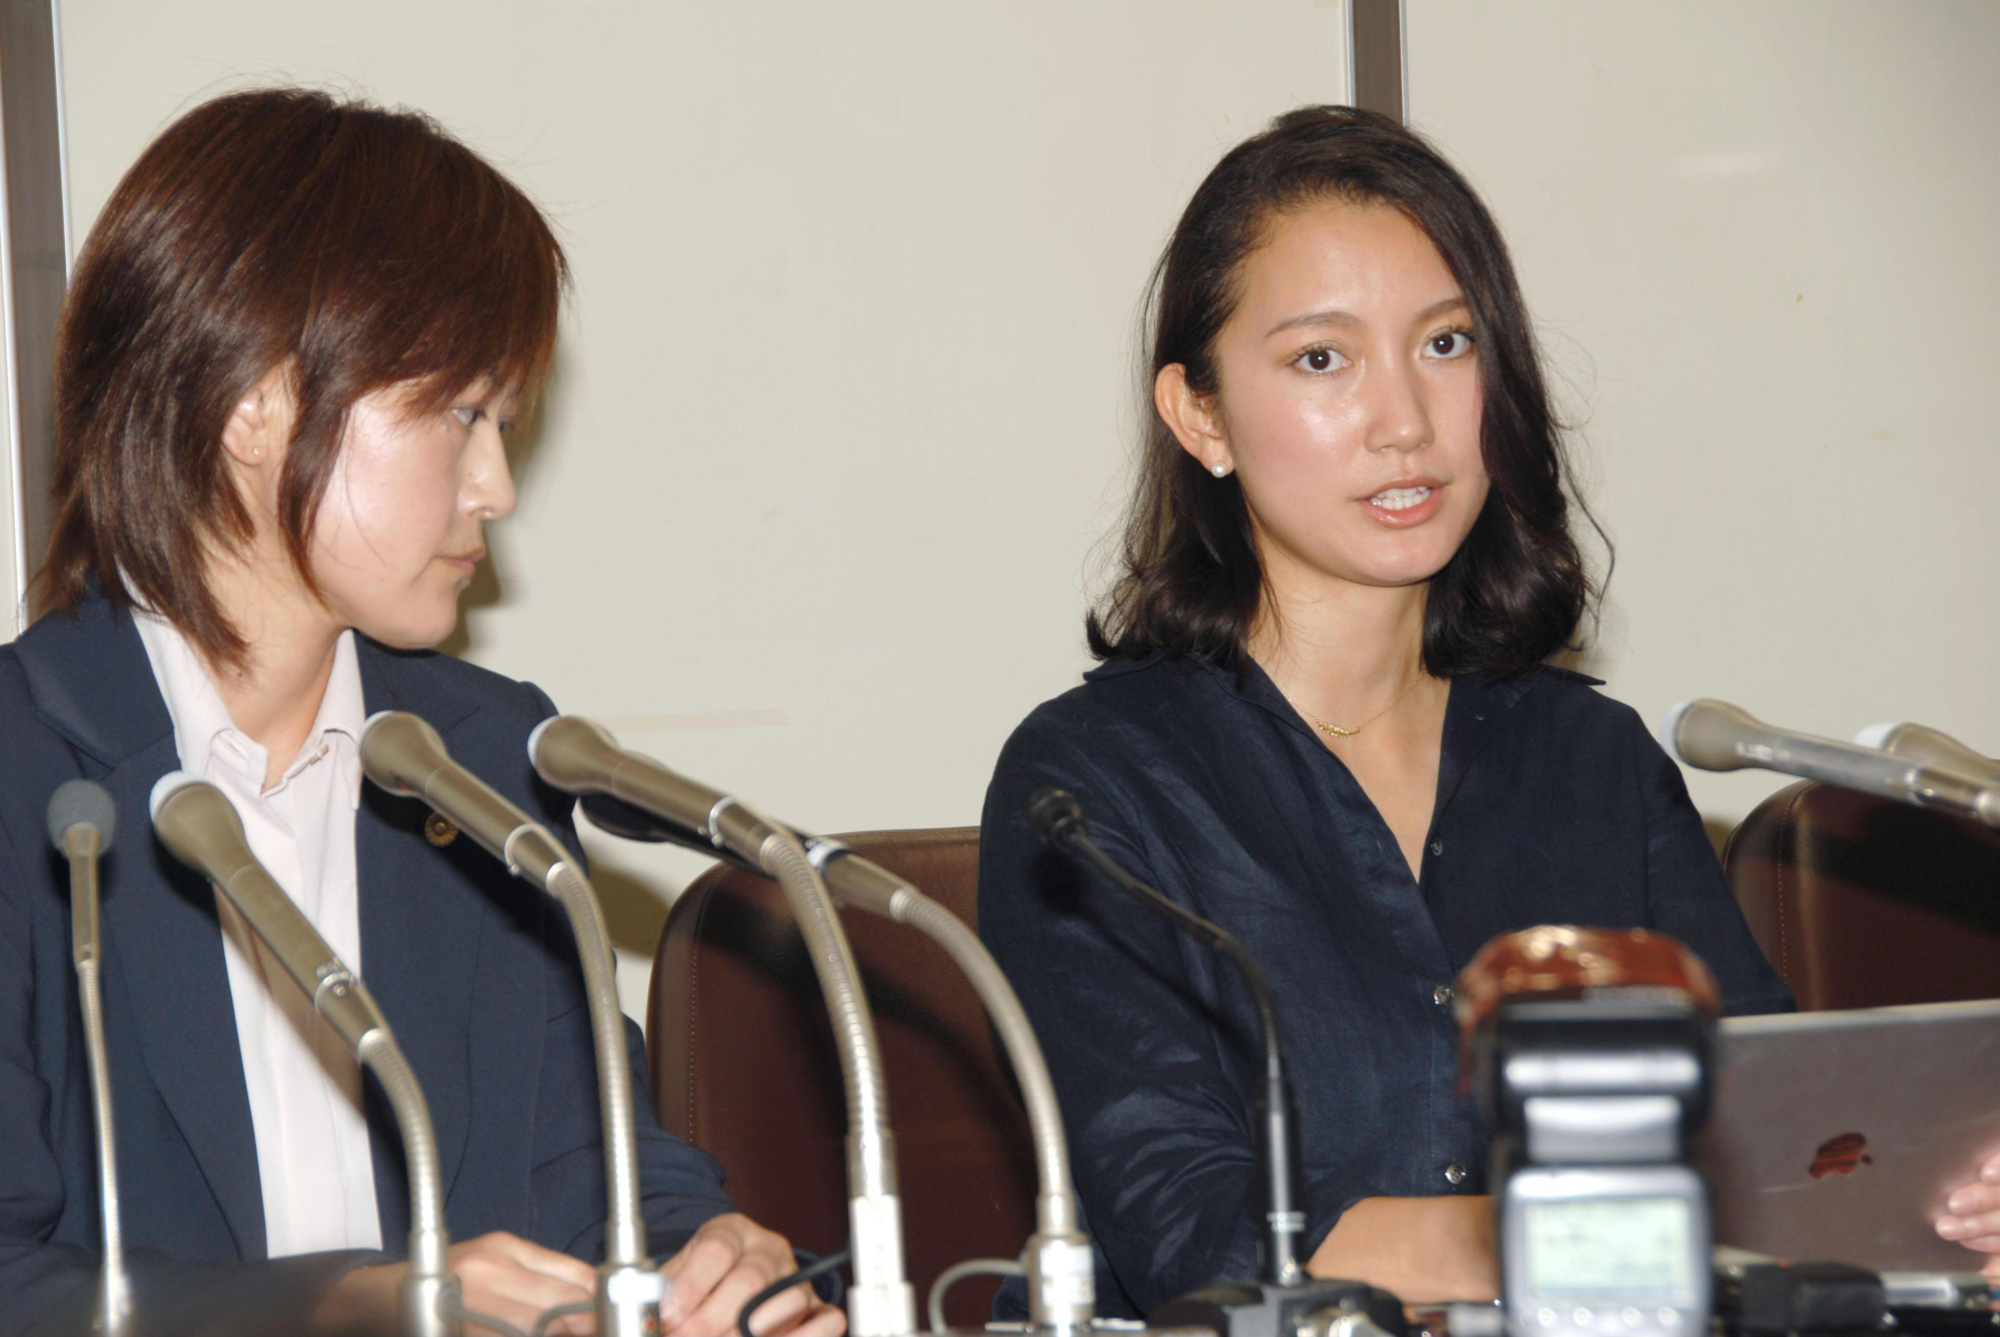 A woman who gave her name only as Shiori (right) speaks at a news conference in Tokyo on Monday about her allegation that a high-profile journalist raped her in 2015. | KYODO